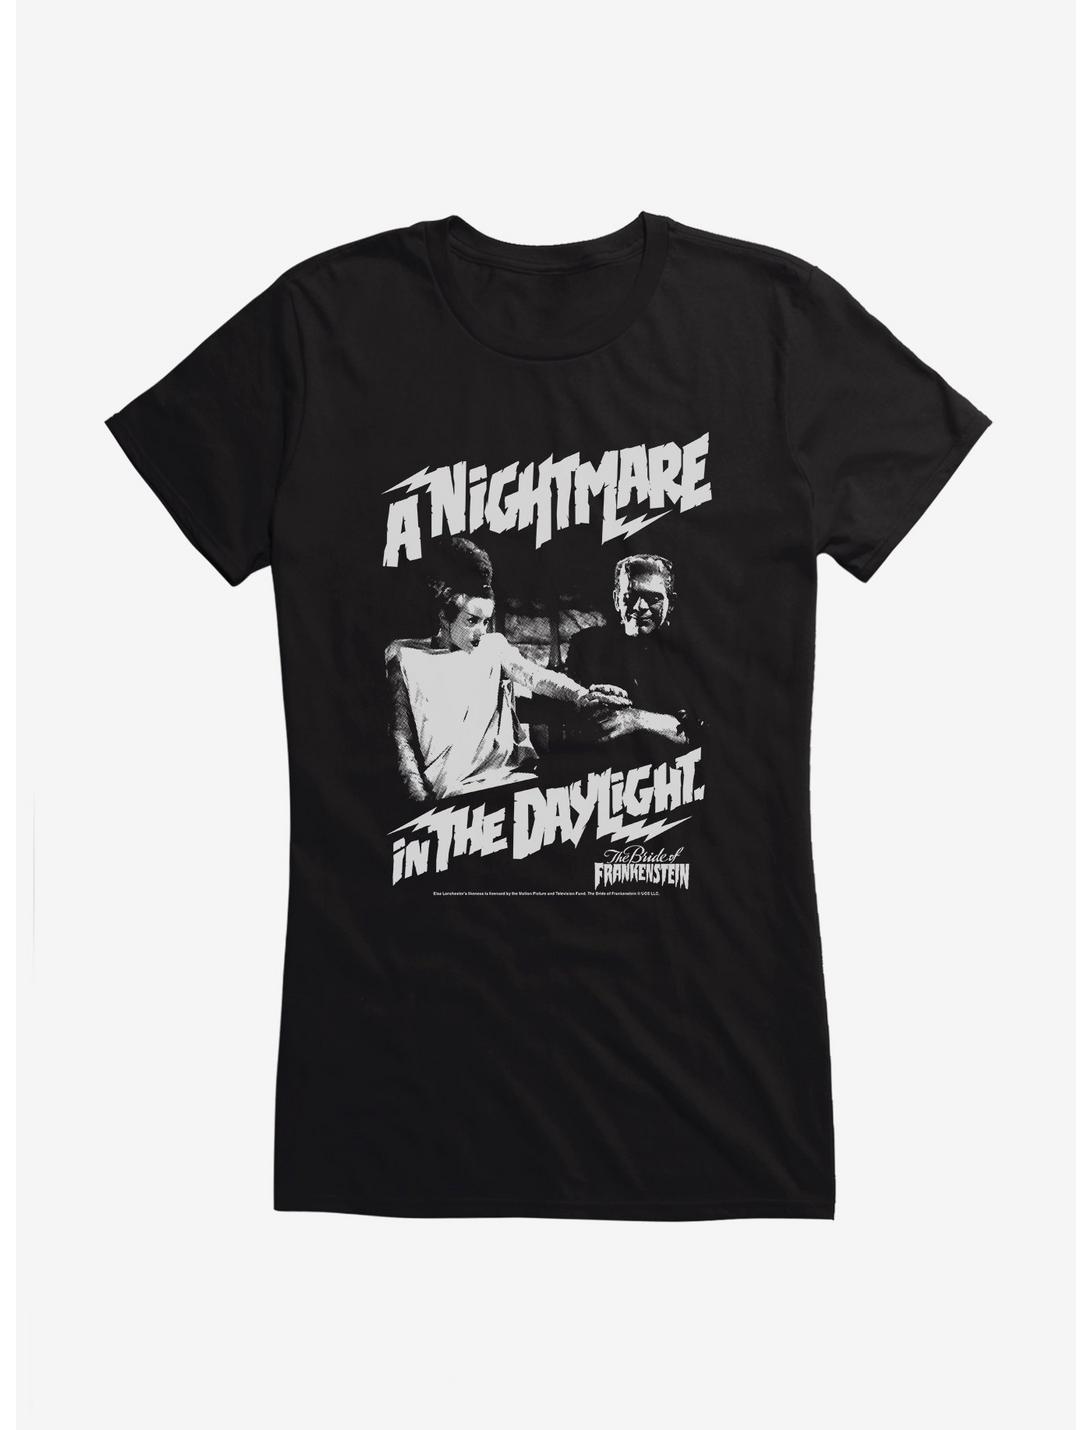 The Bride Of Frankenstein A Nightmare In The Daylight Girls T-Shirt, BLACK, hi-res